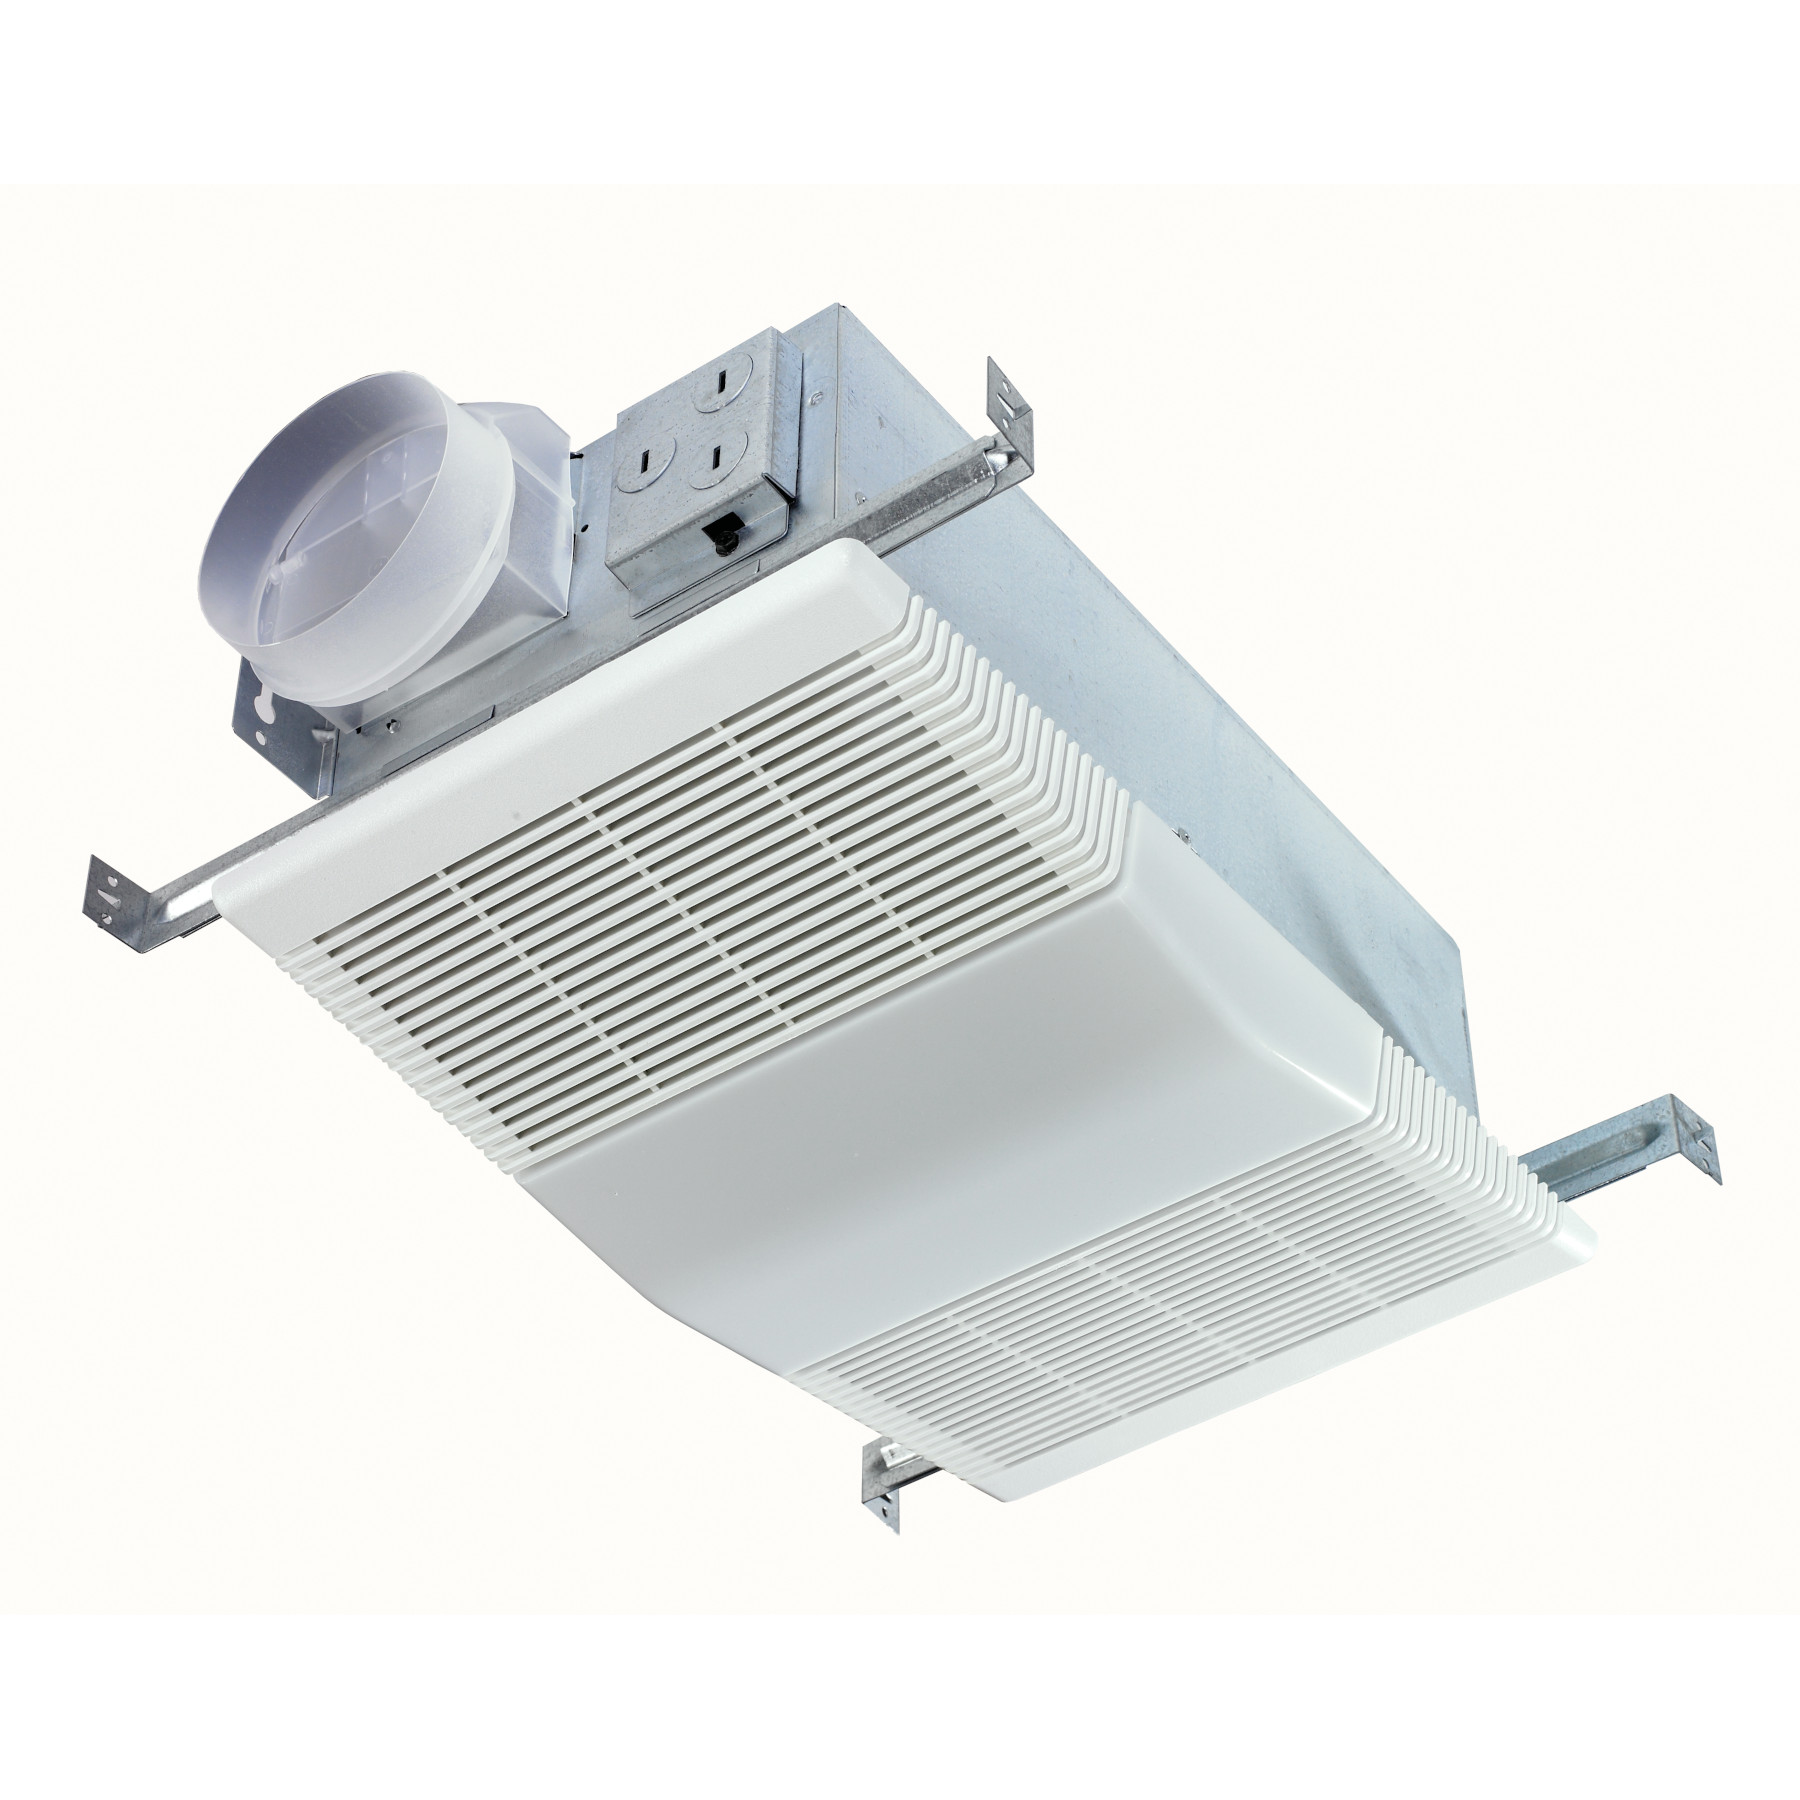 NuTone® 70 CFM Ventilation Fan with Light, White Polymeric Lens and Grille, 4.0 Sones